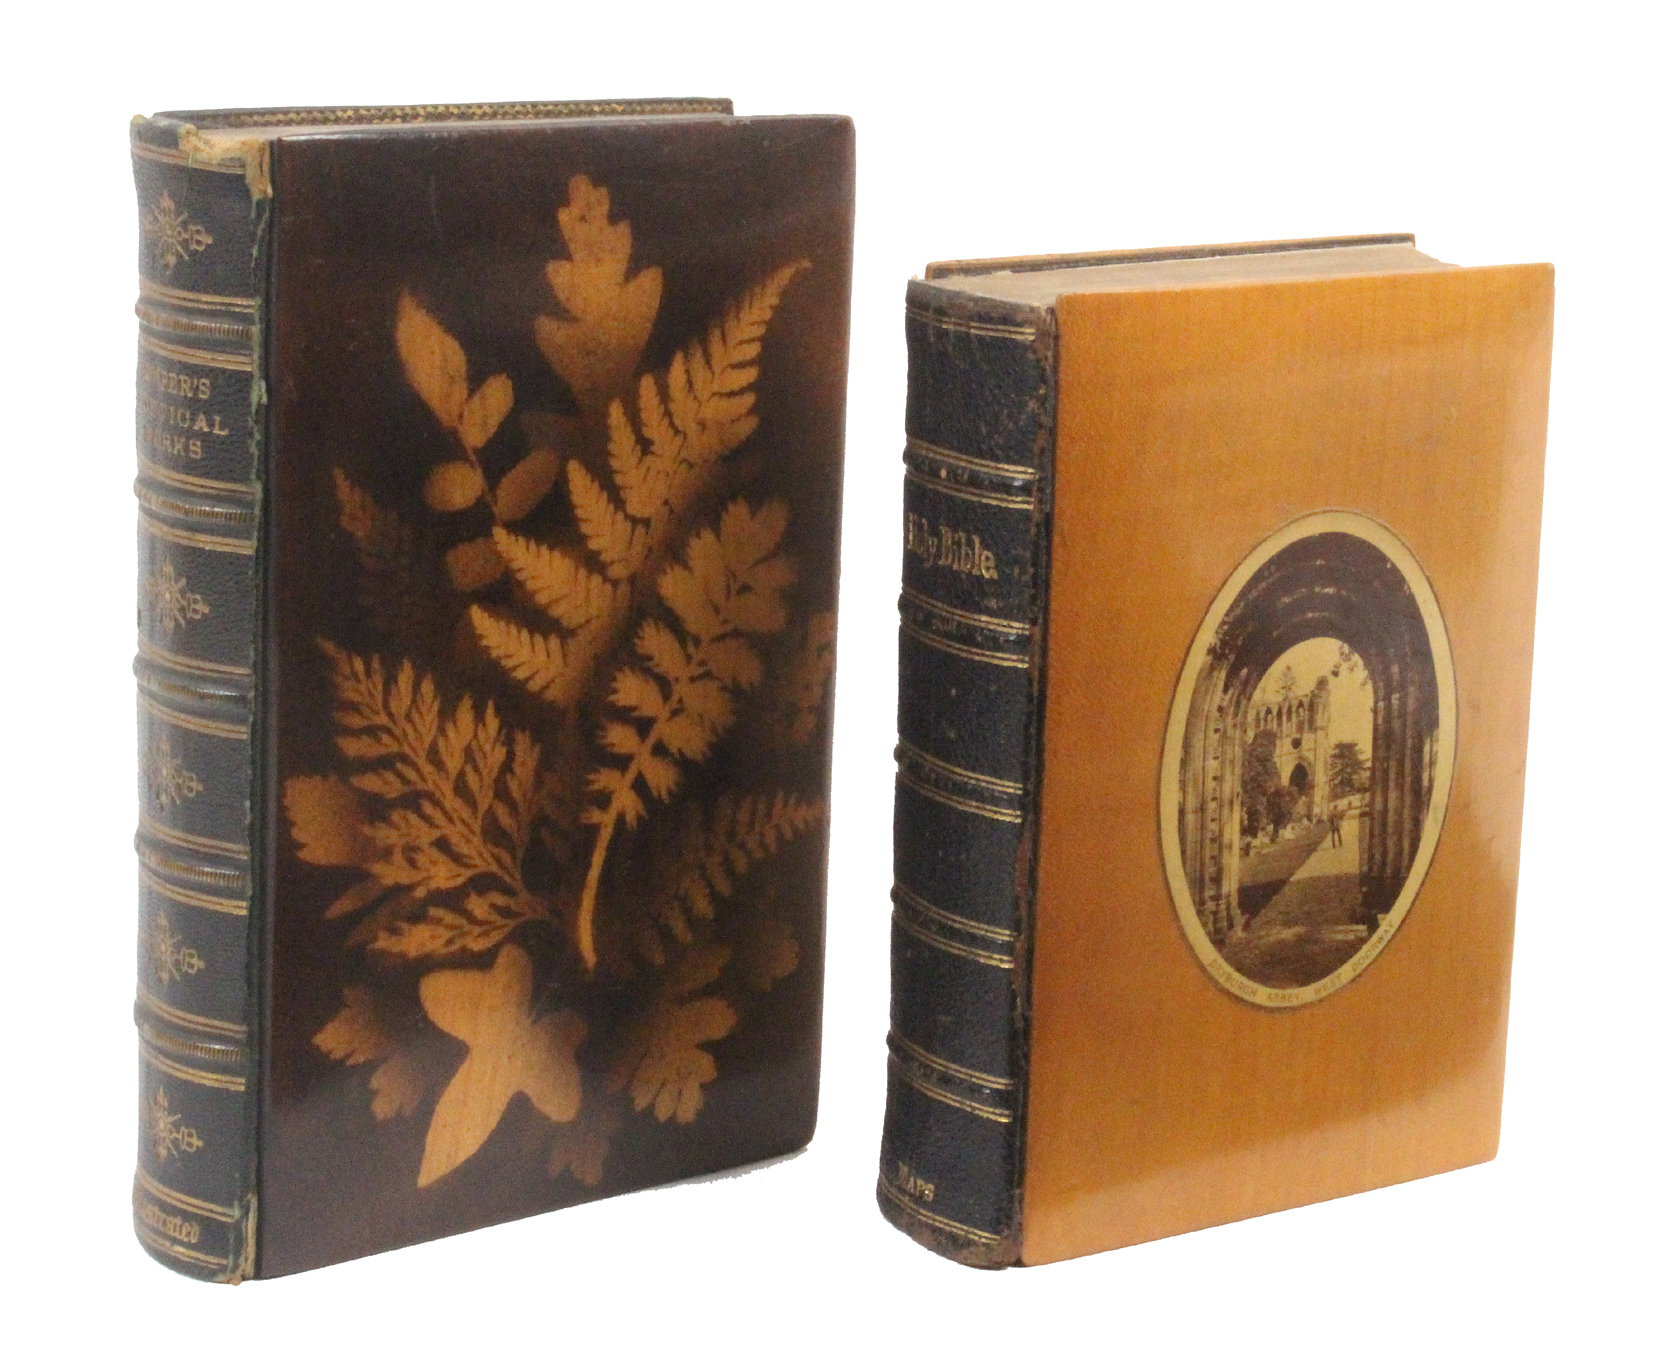 Mauchline ware – two books – comprising a fern ware example, dark ground – Poetical Works of William